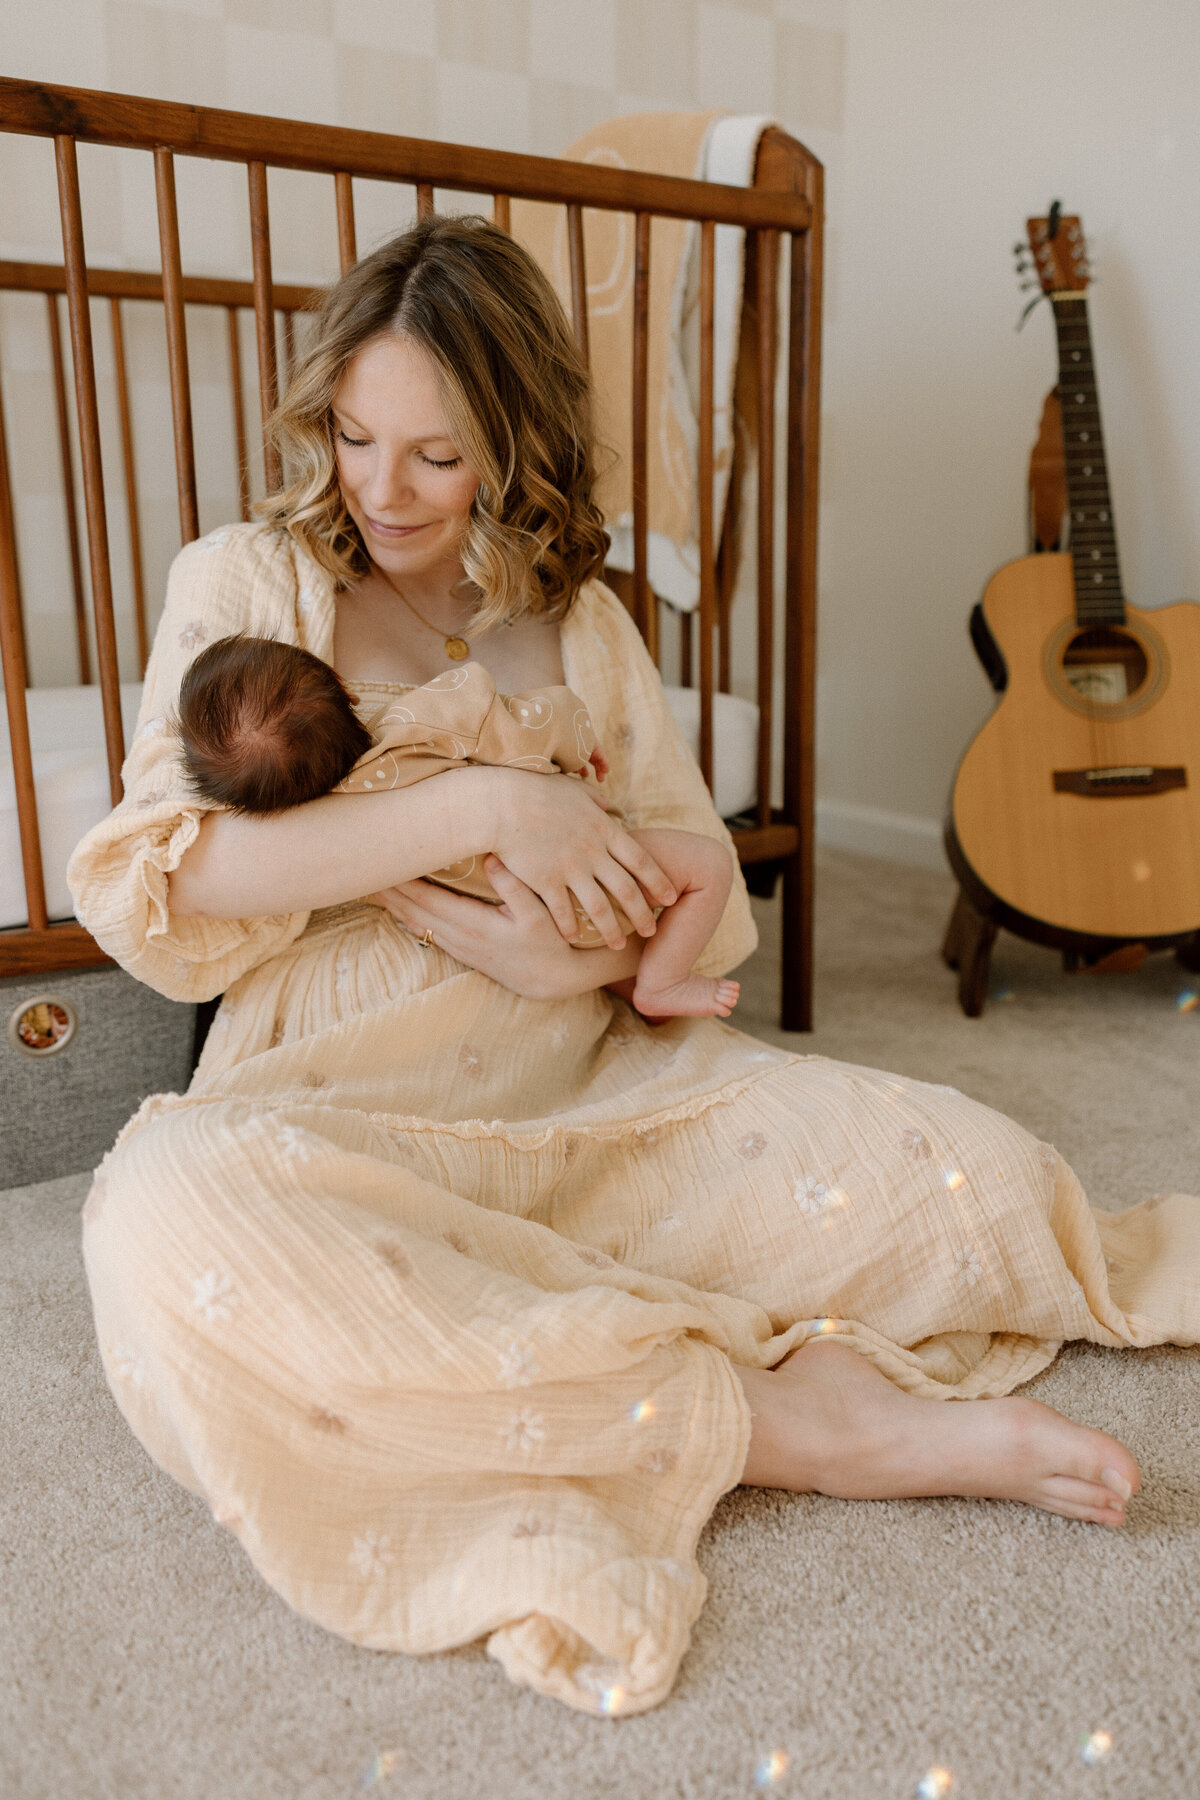 in-home-newborn-lifestyle-session-lancaster-pa-cara-marie-photography-57